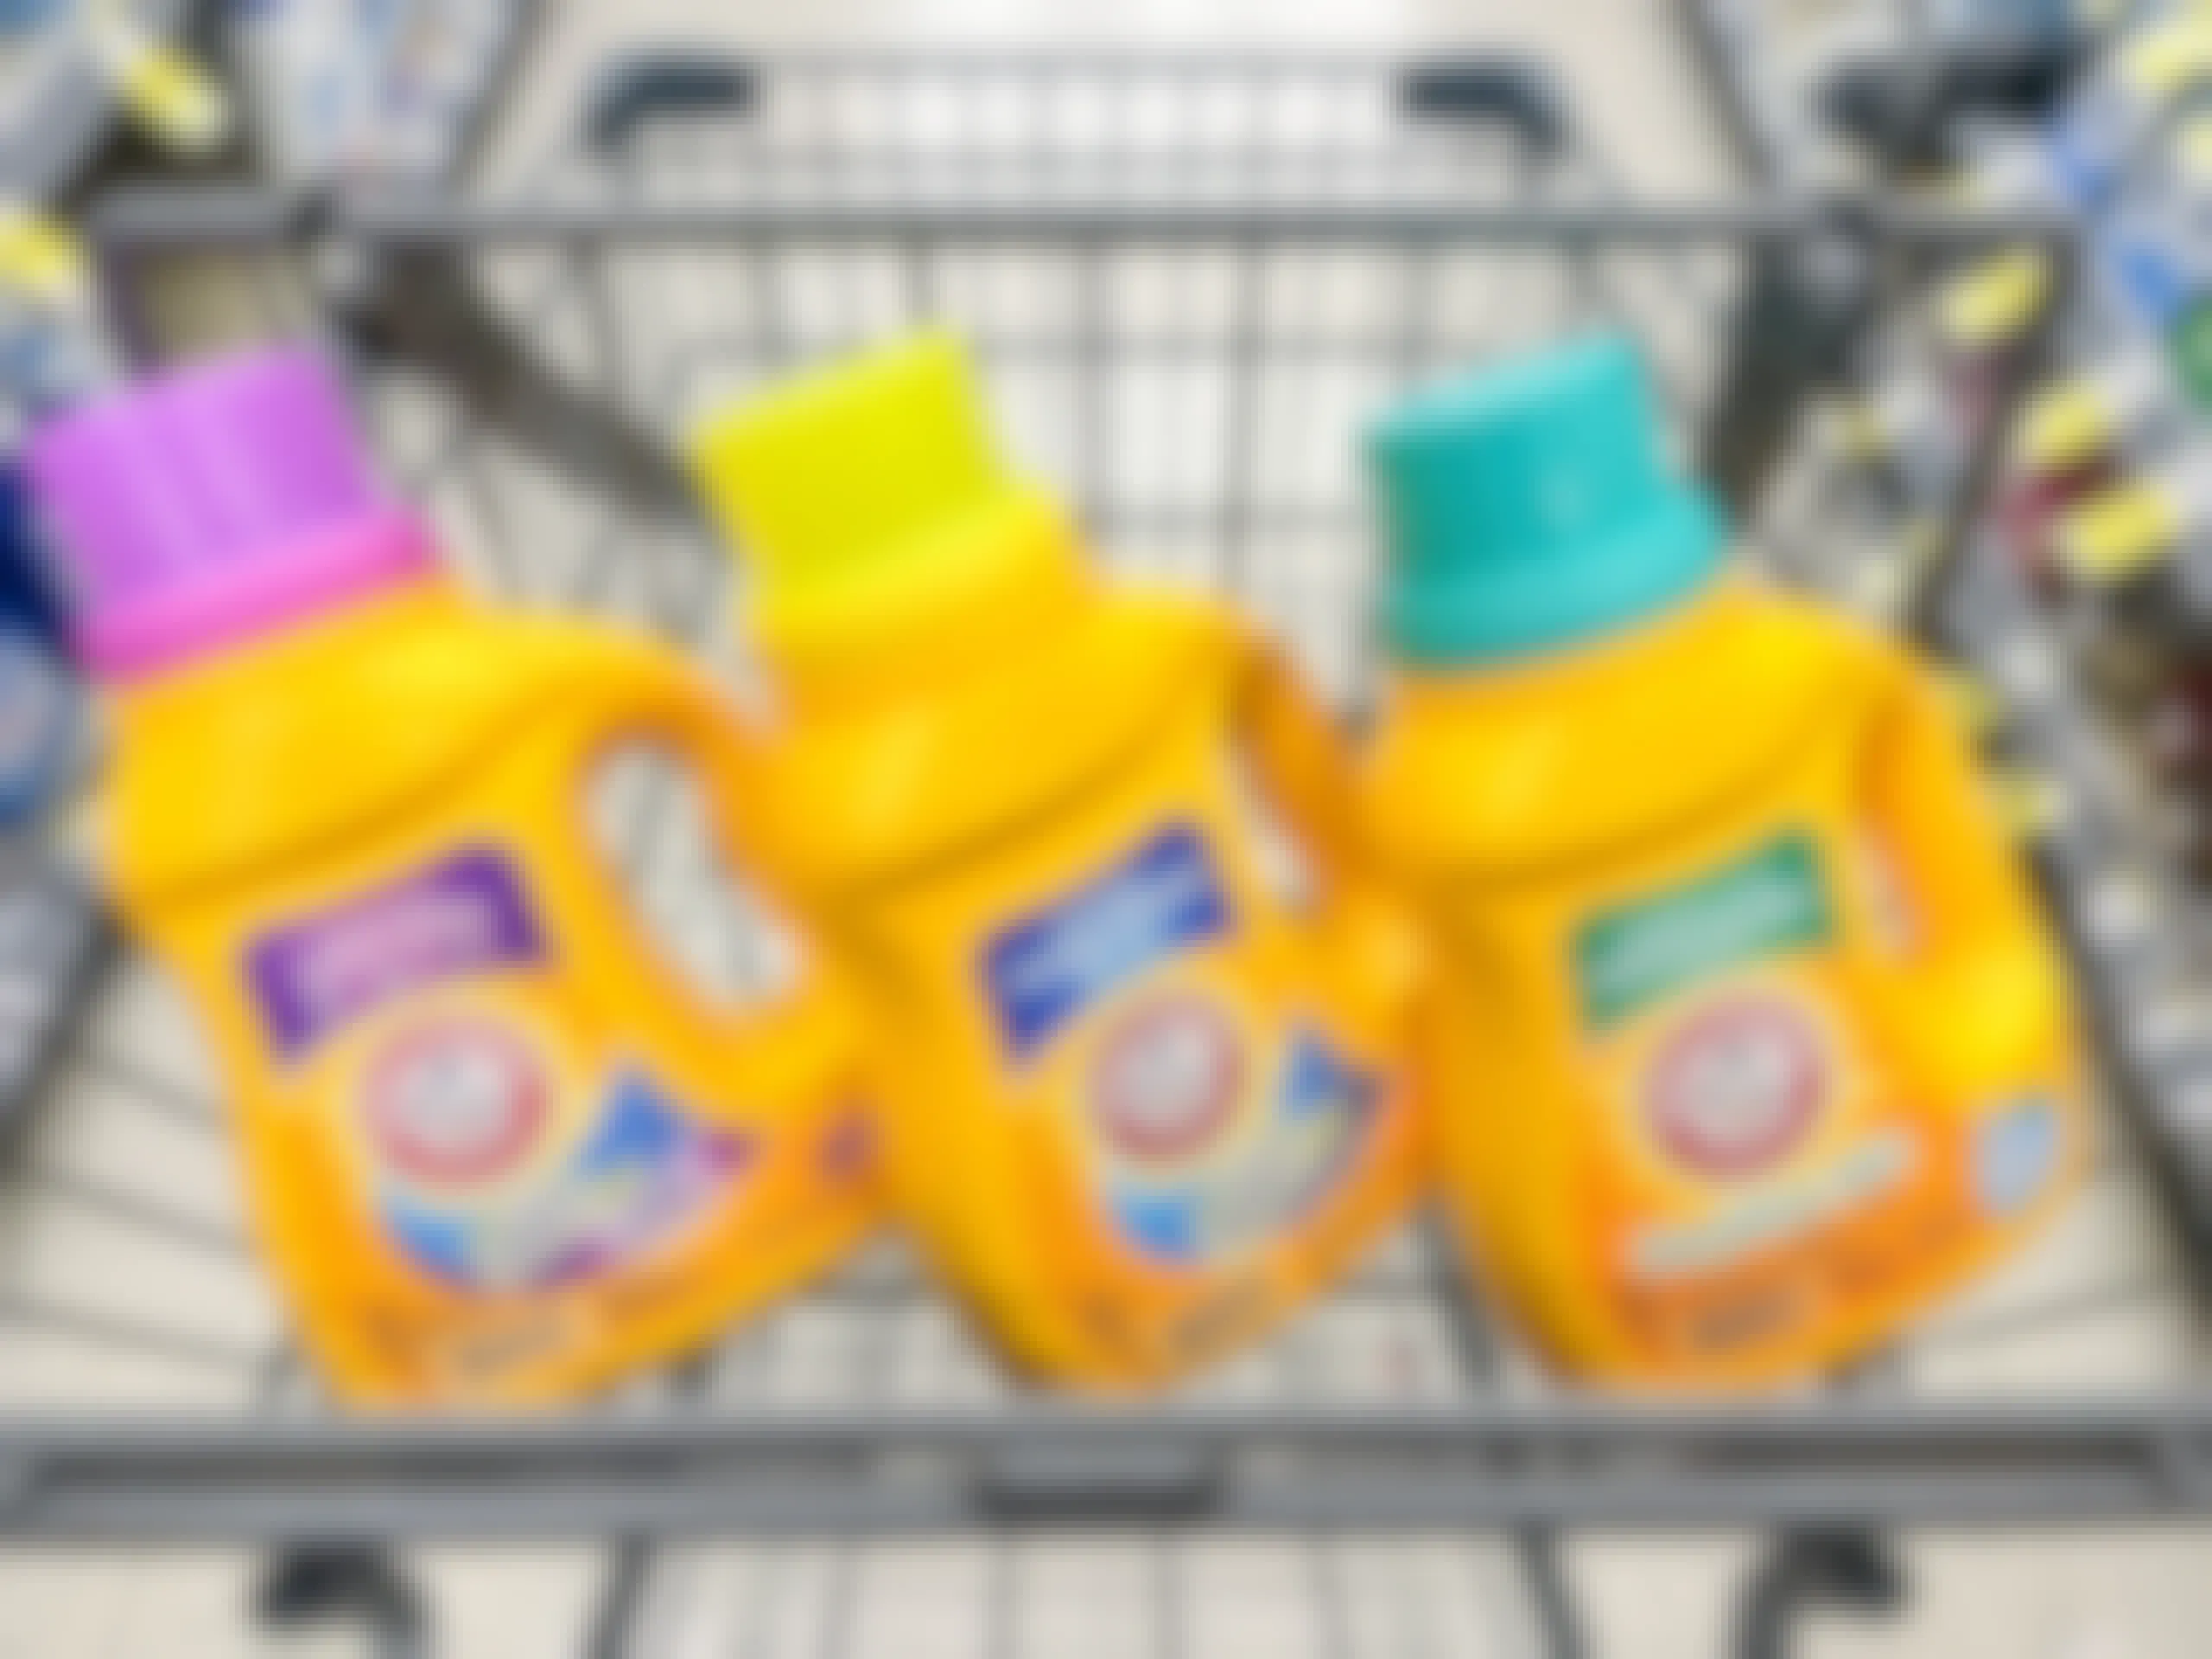 arm and hammer laundry detergent in shopping cart